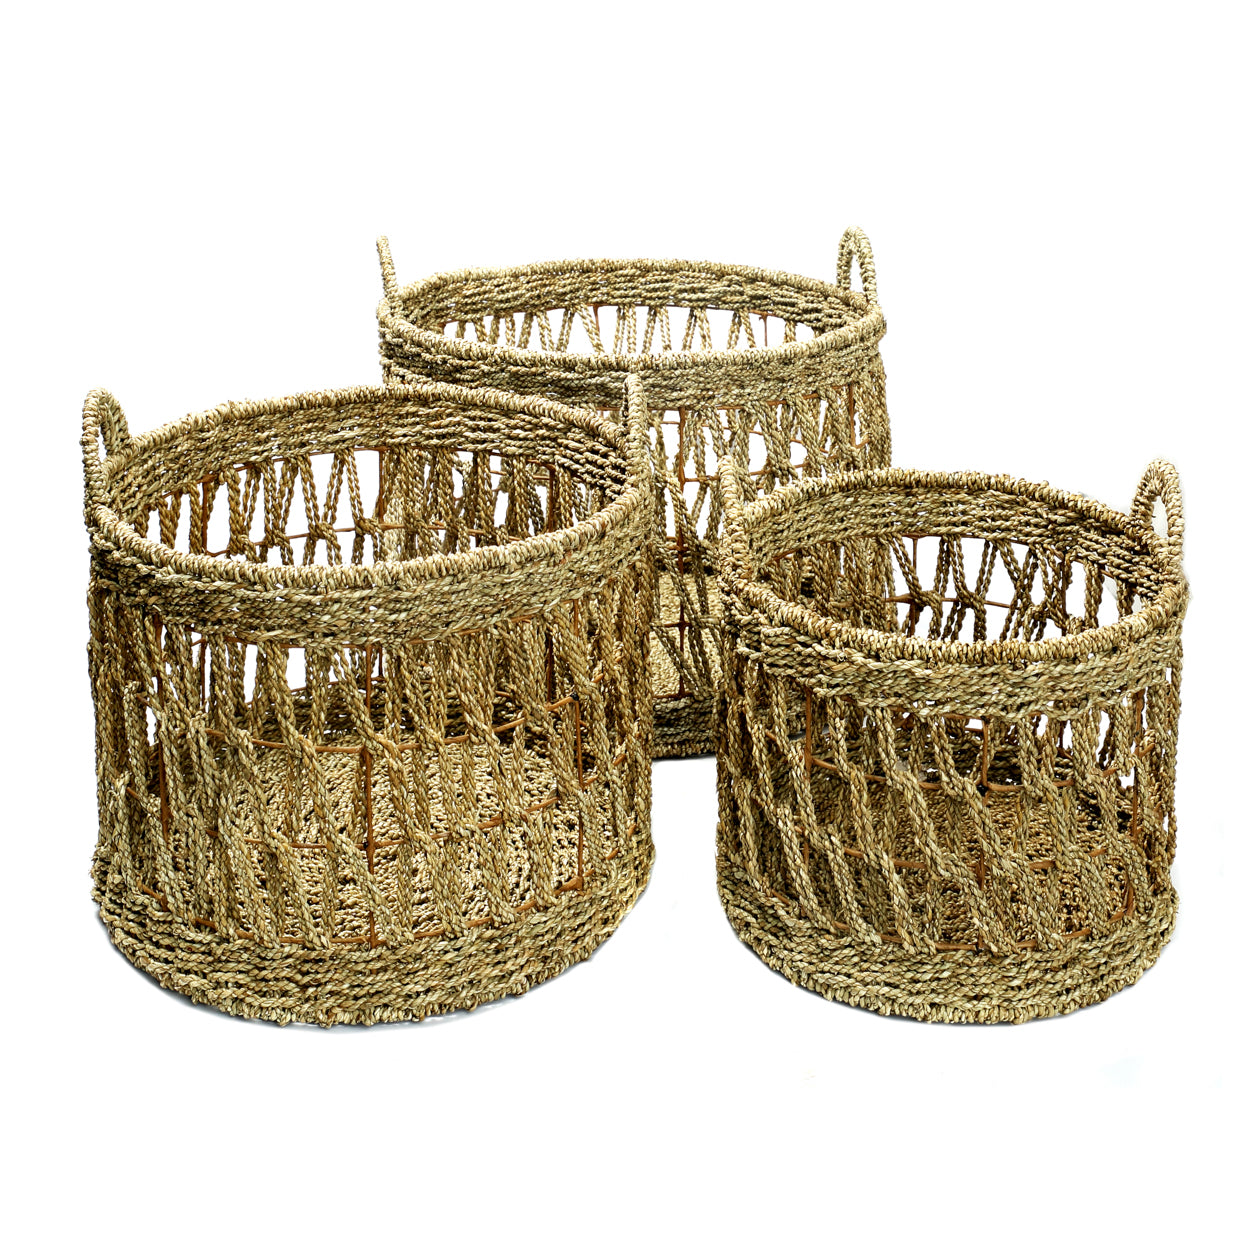 THE PERFORE Baskets Set of 3 front view, white background